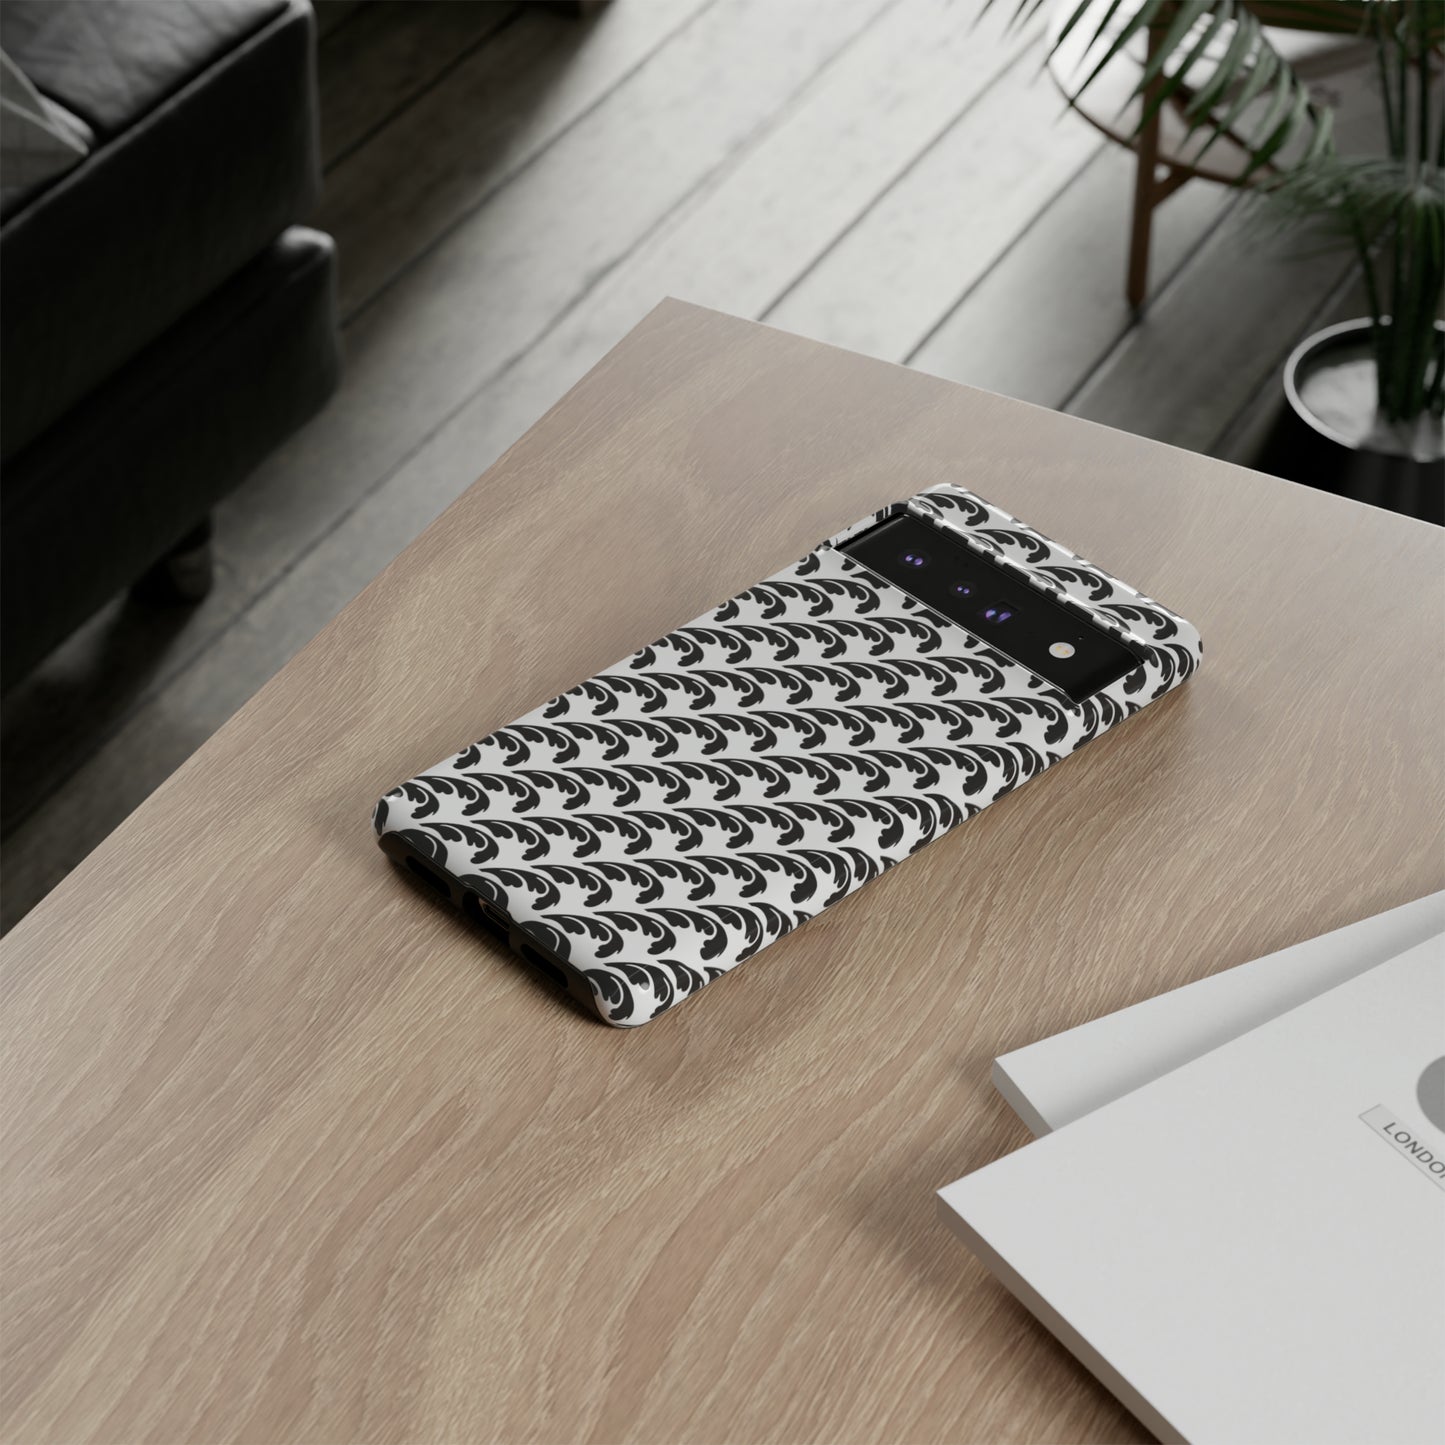 Beautiful Beloved One - Tough Phone Cases - blk/wht